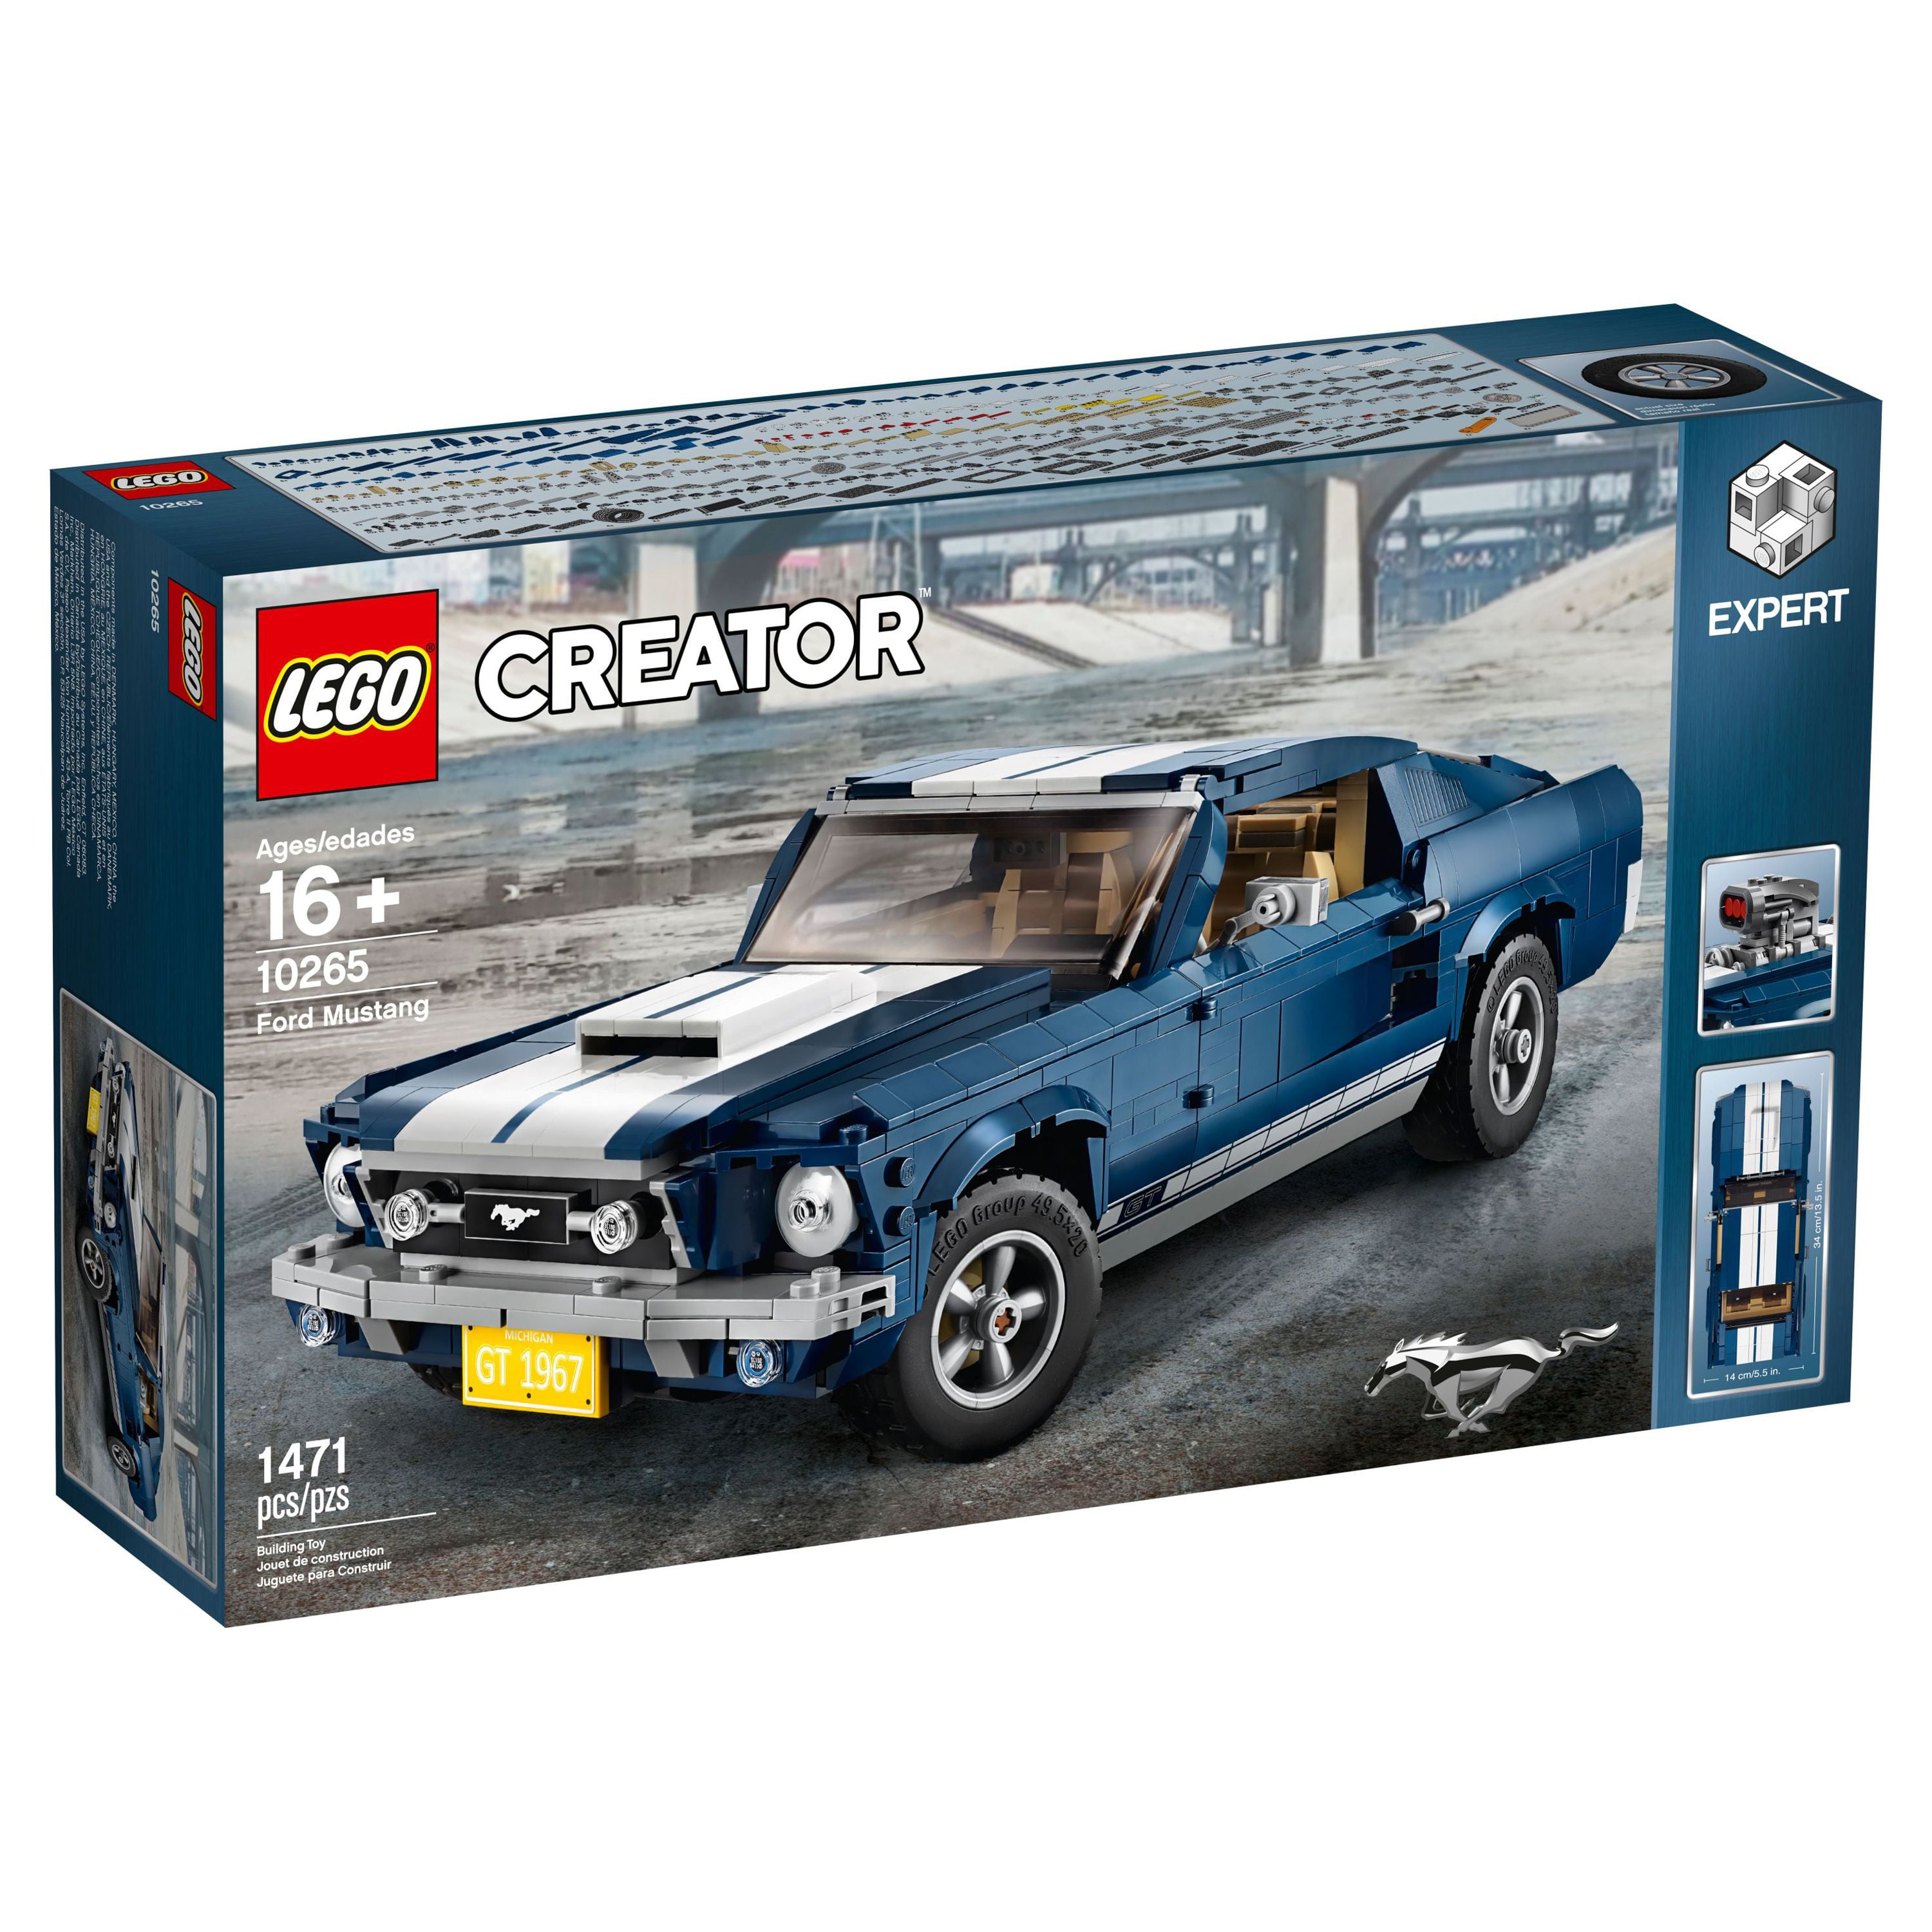 LEGO Creator Expert Ford Mustang 10265 Building Set - Exclusive Advanced Collector's Car Model, Featuring Detailed Interior, V8 Engine, Home and Office Display, Collectible for Adults and Teens - image 3 of 6